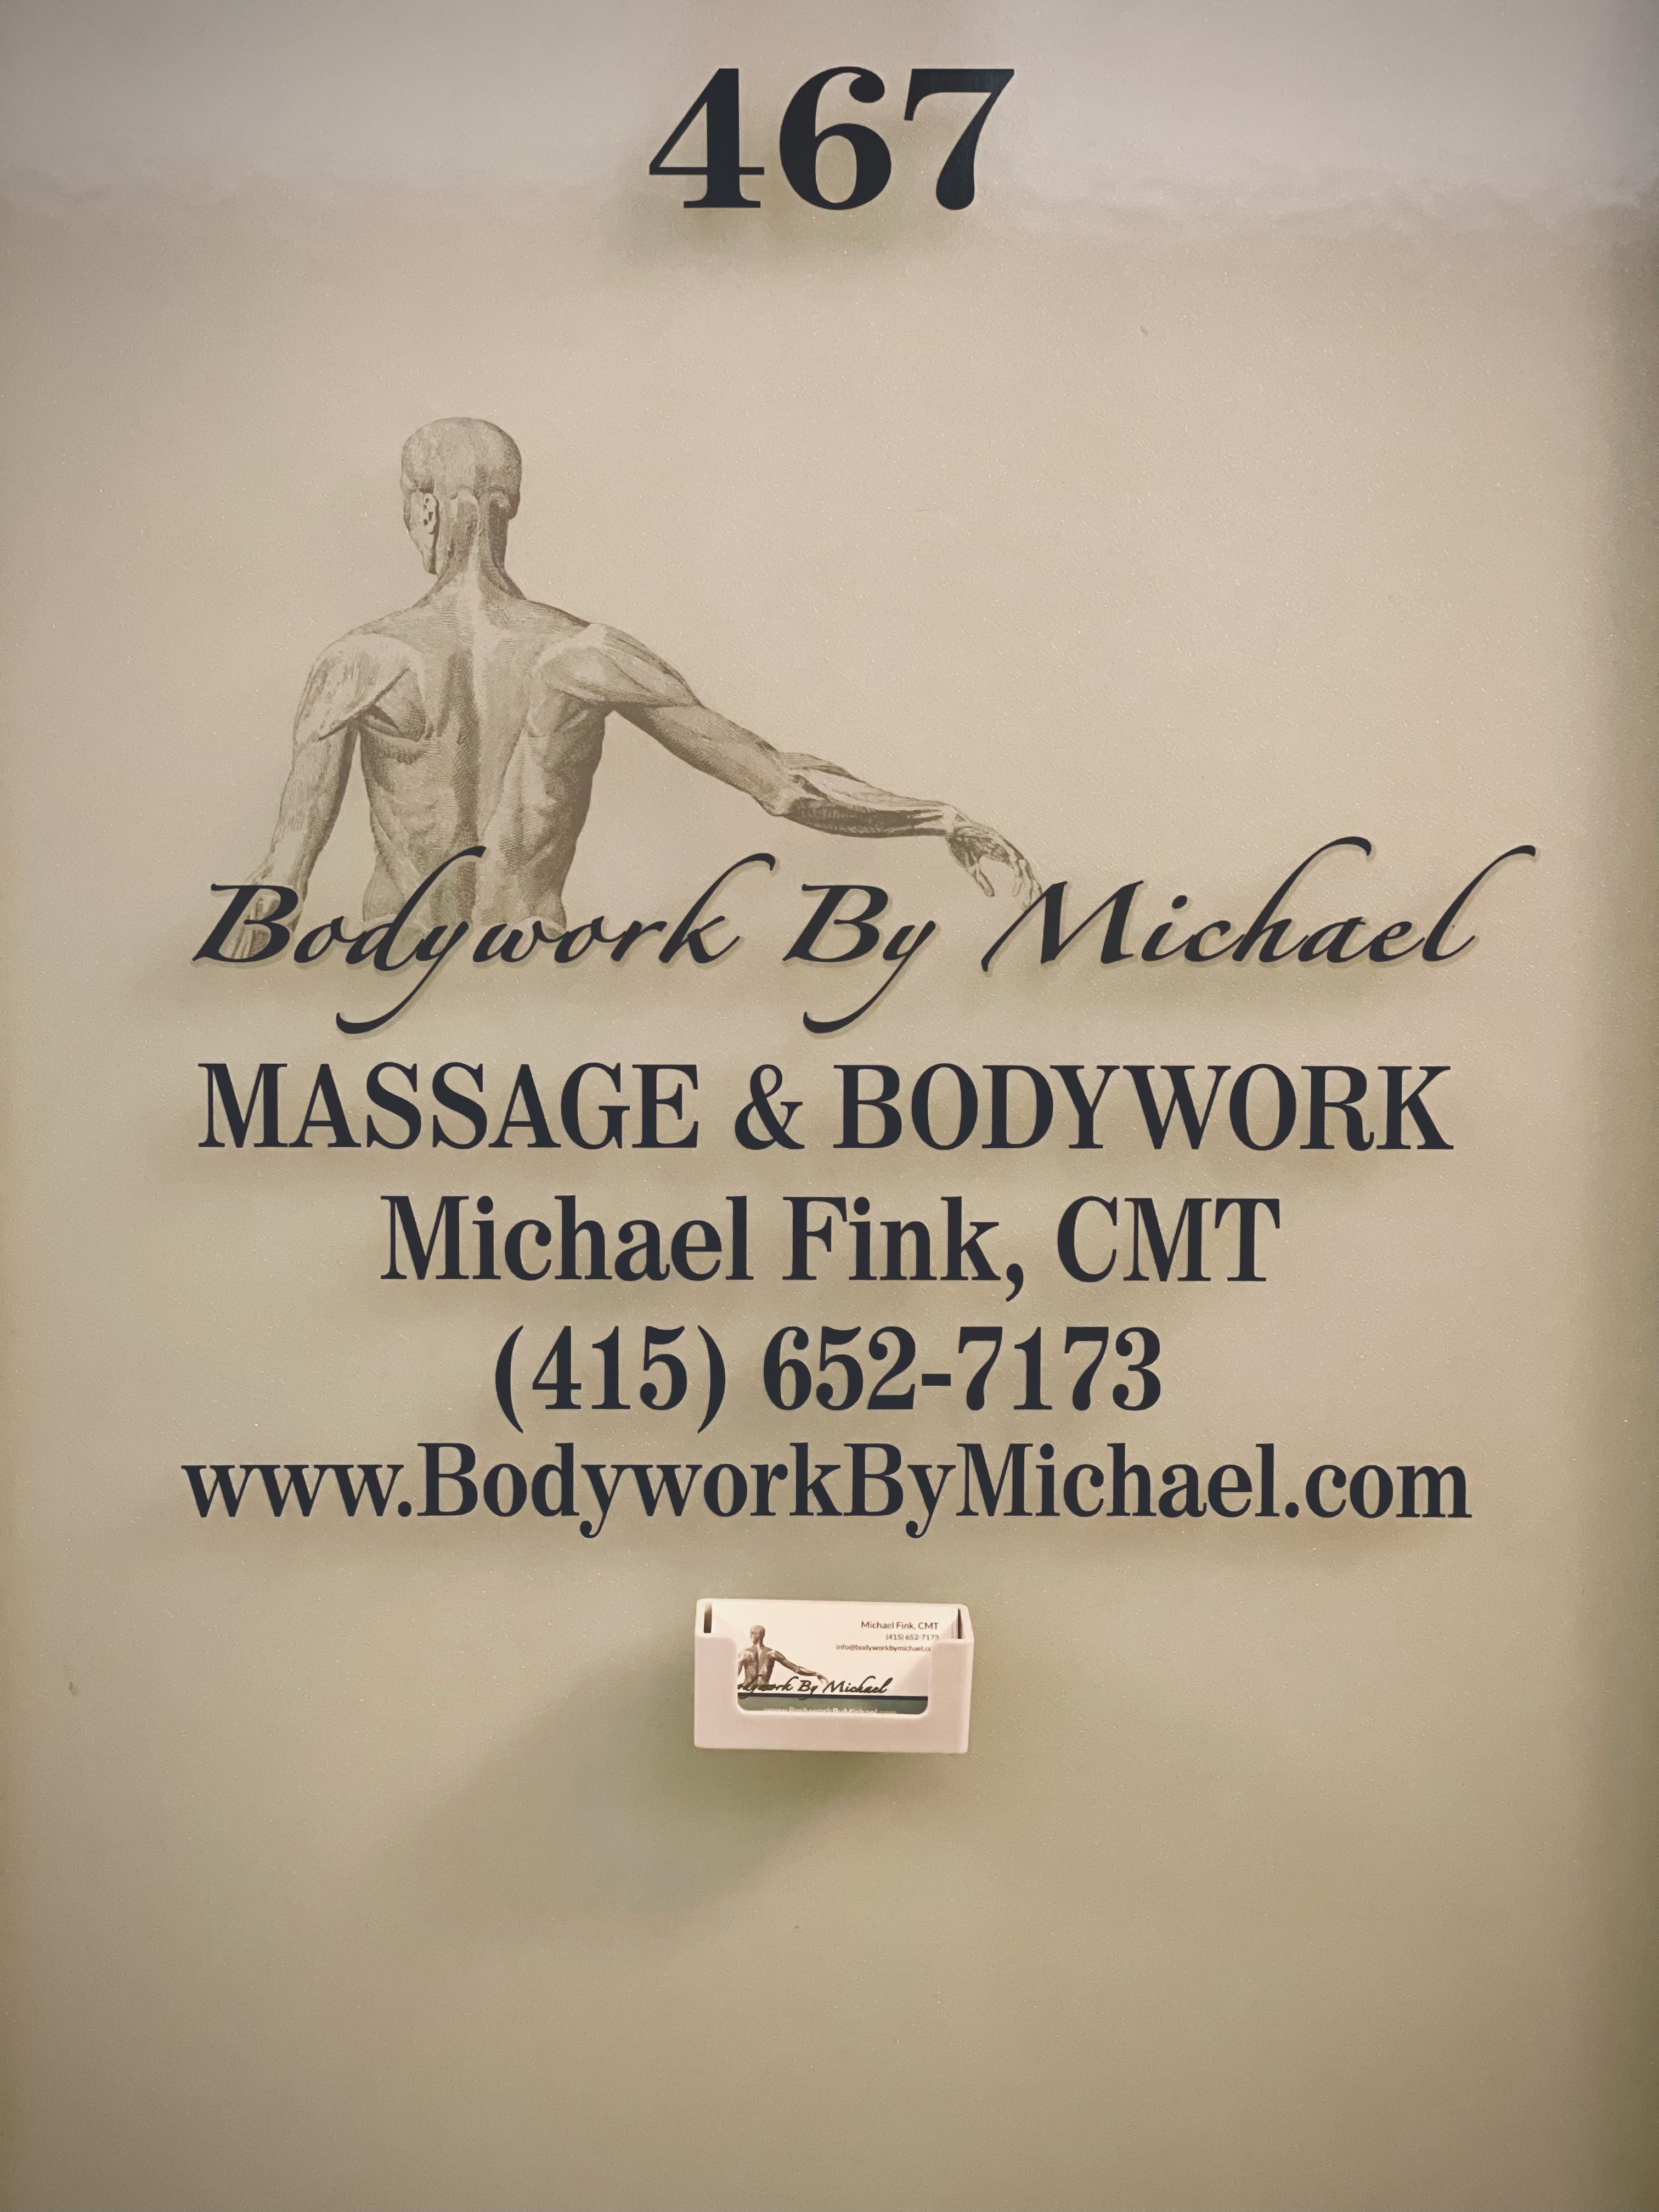 Contact Michael at Bodywork by Michael